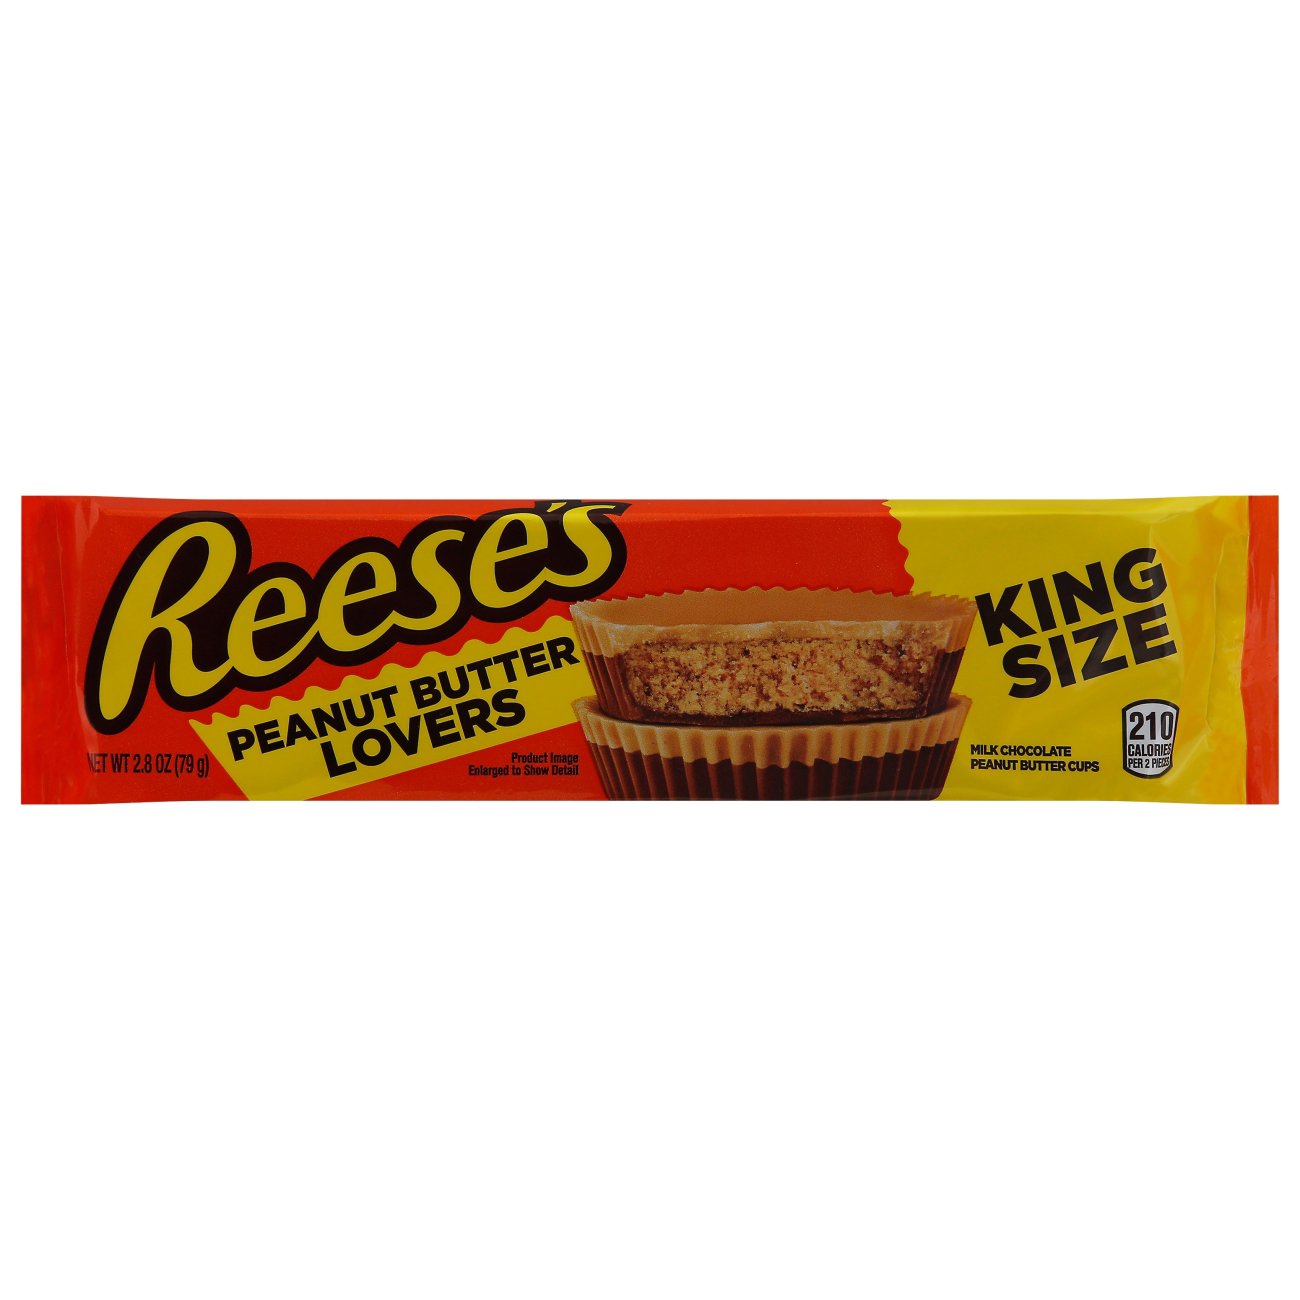 Reese's Peanut Butter Cups, Milk Chocolate - 24 pack, 2.8 oz each